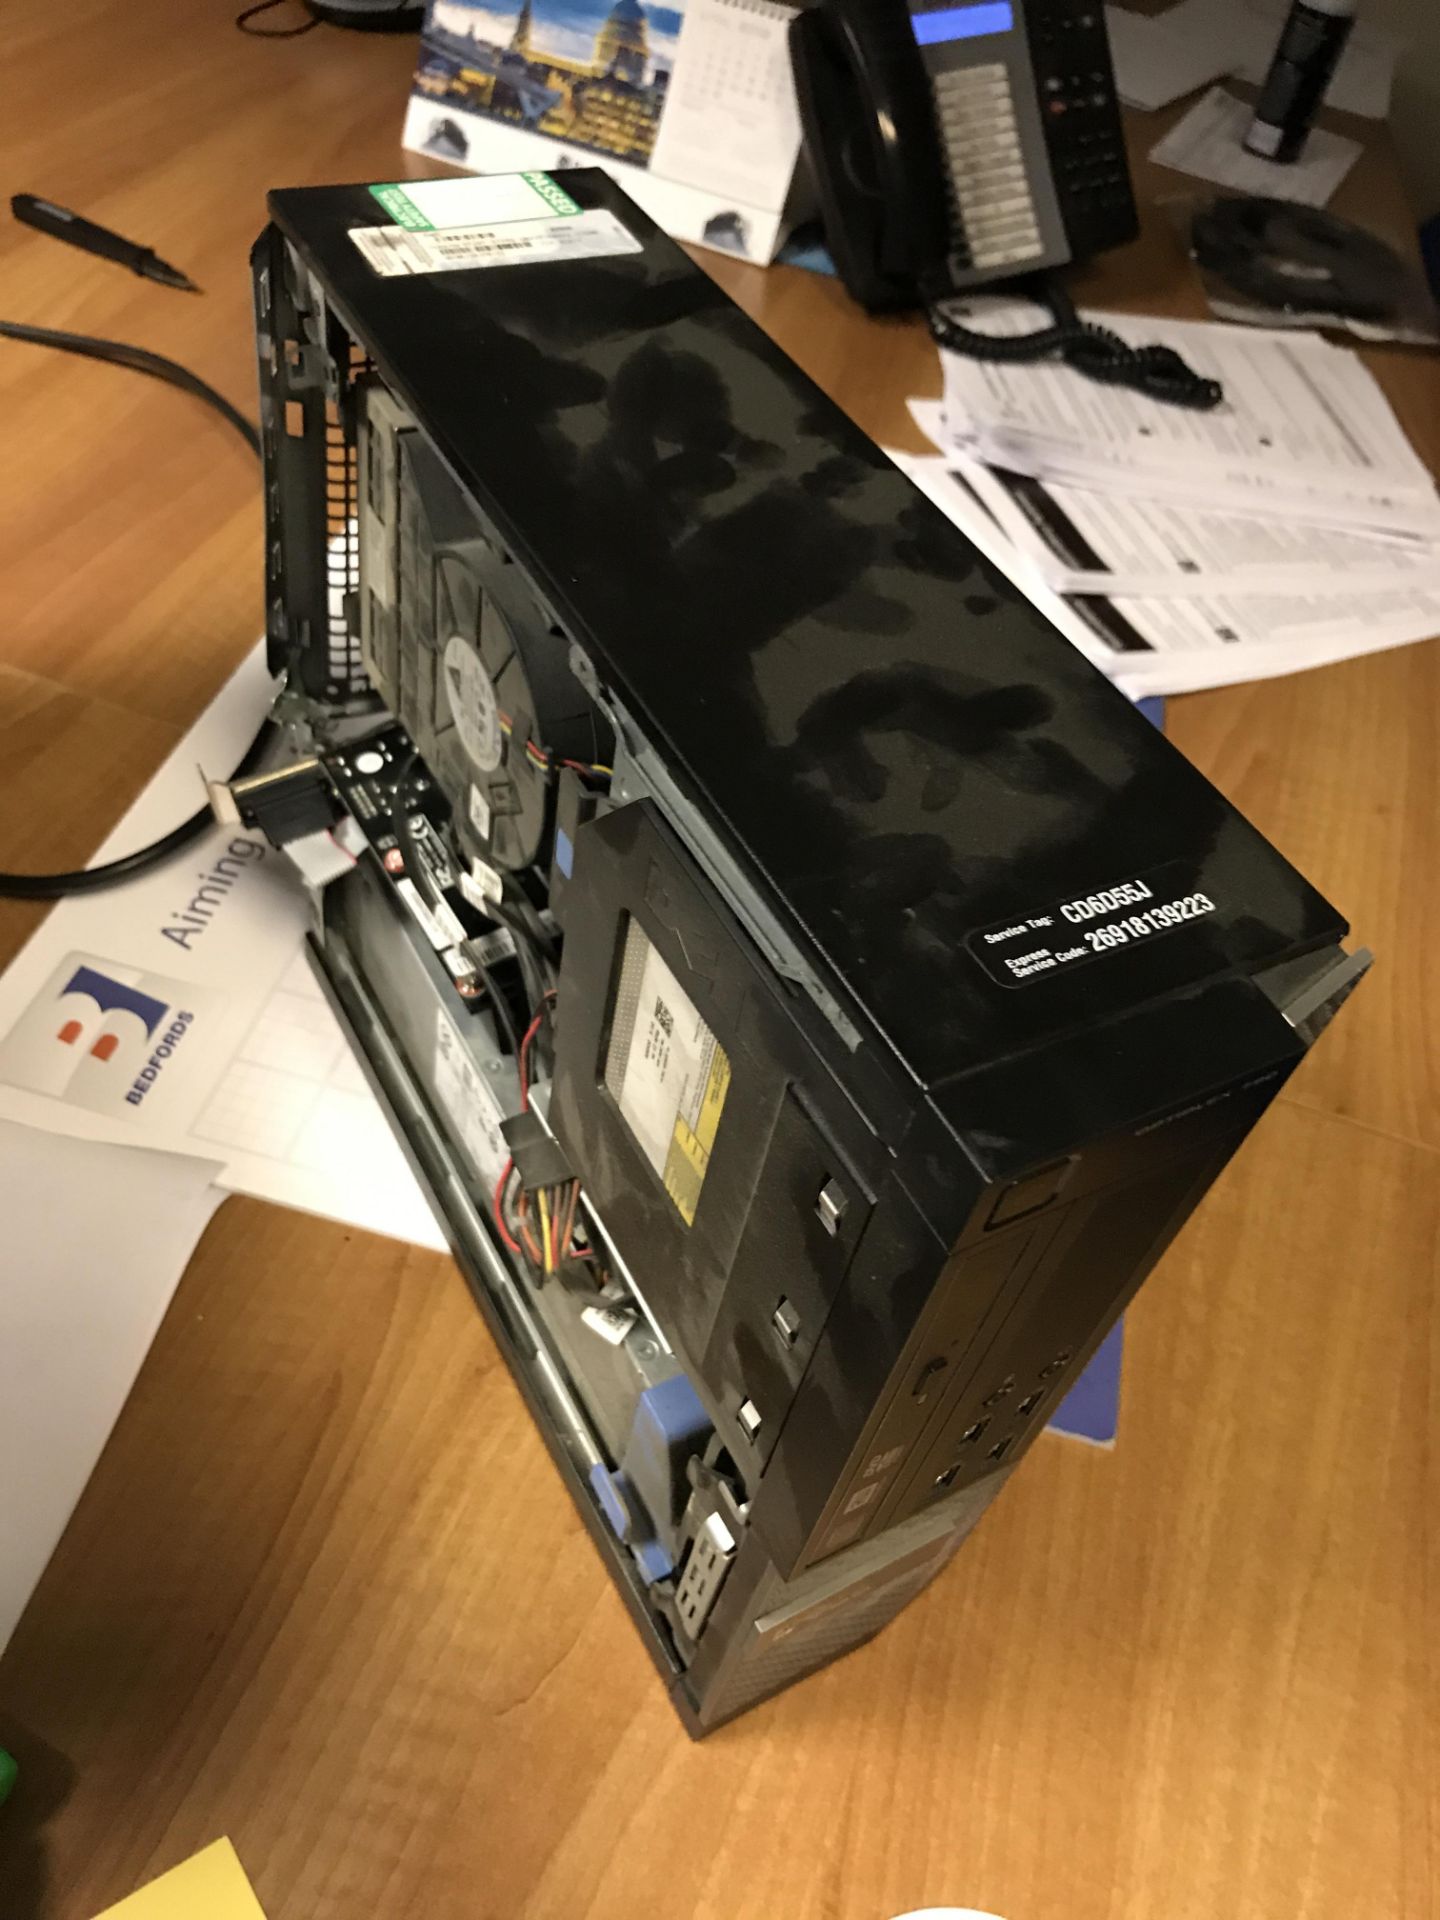 Dell Optiplex 790 Intel Core i5 Personal Computer (hard disk removed) (side panel missing), with two - Image 2 of 2